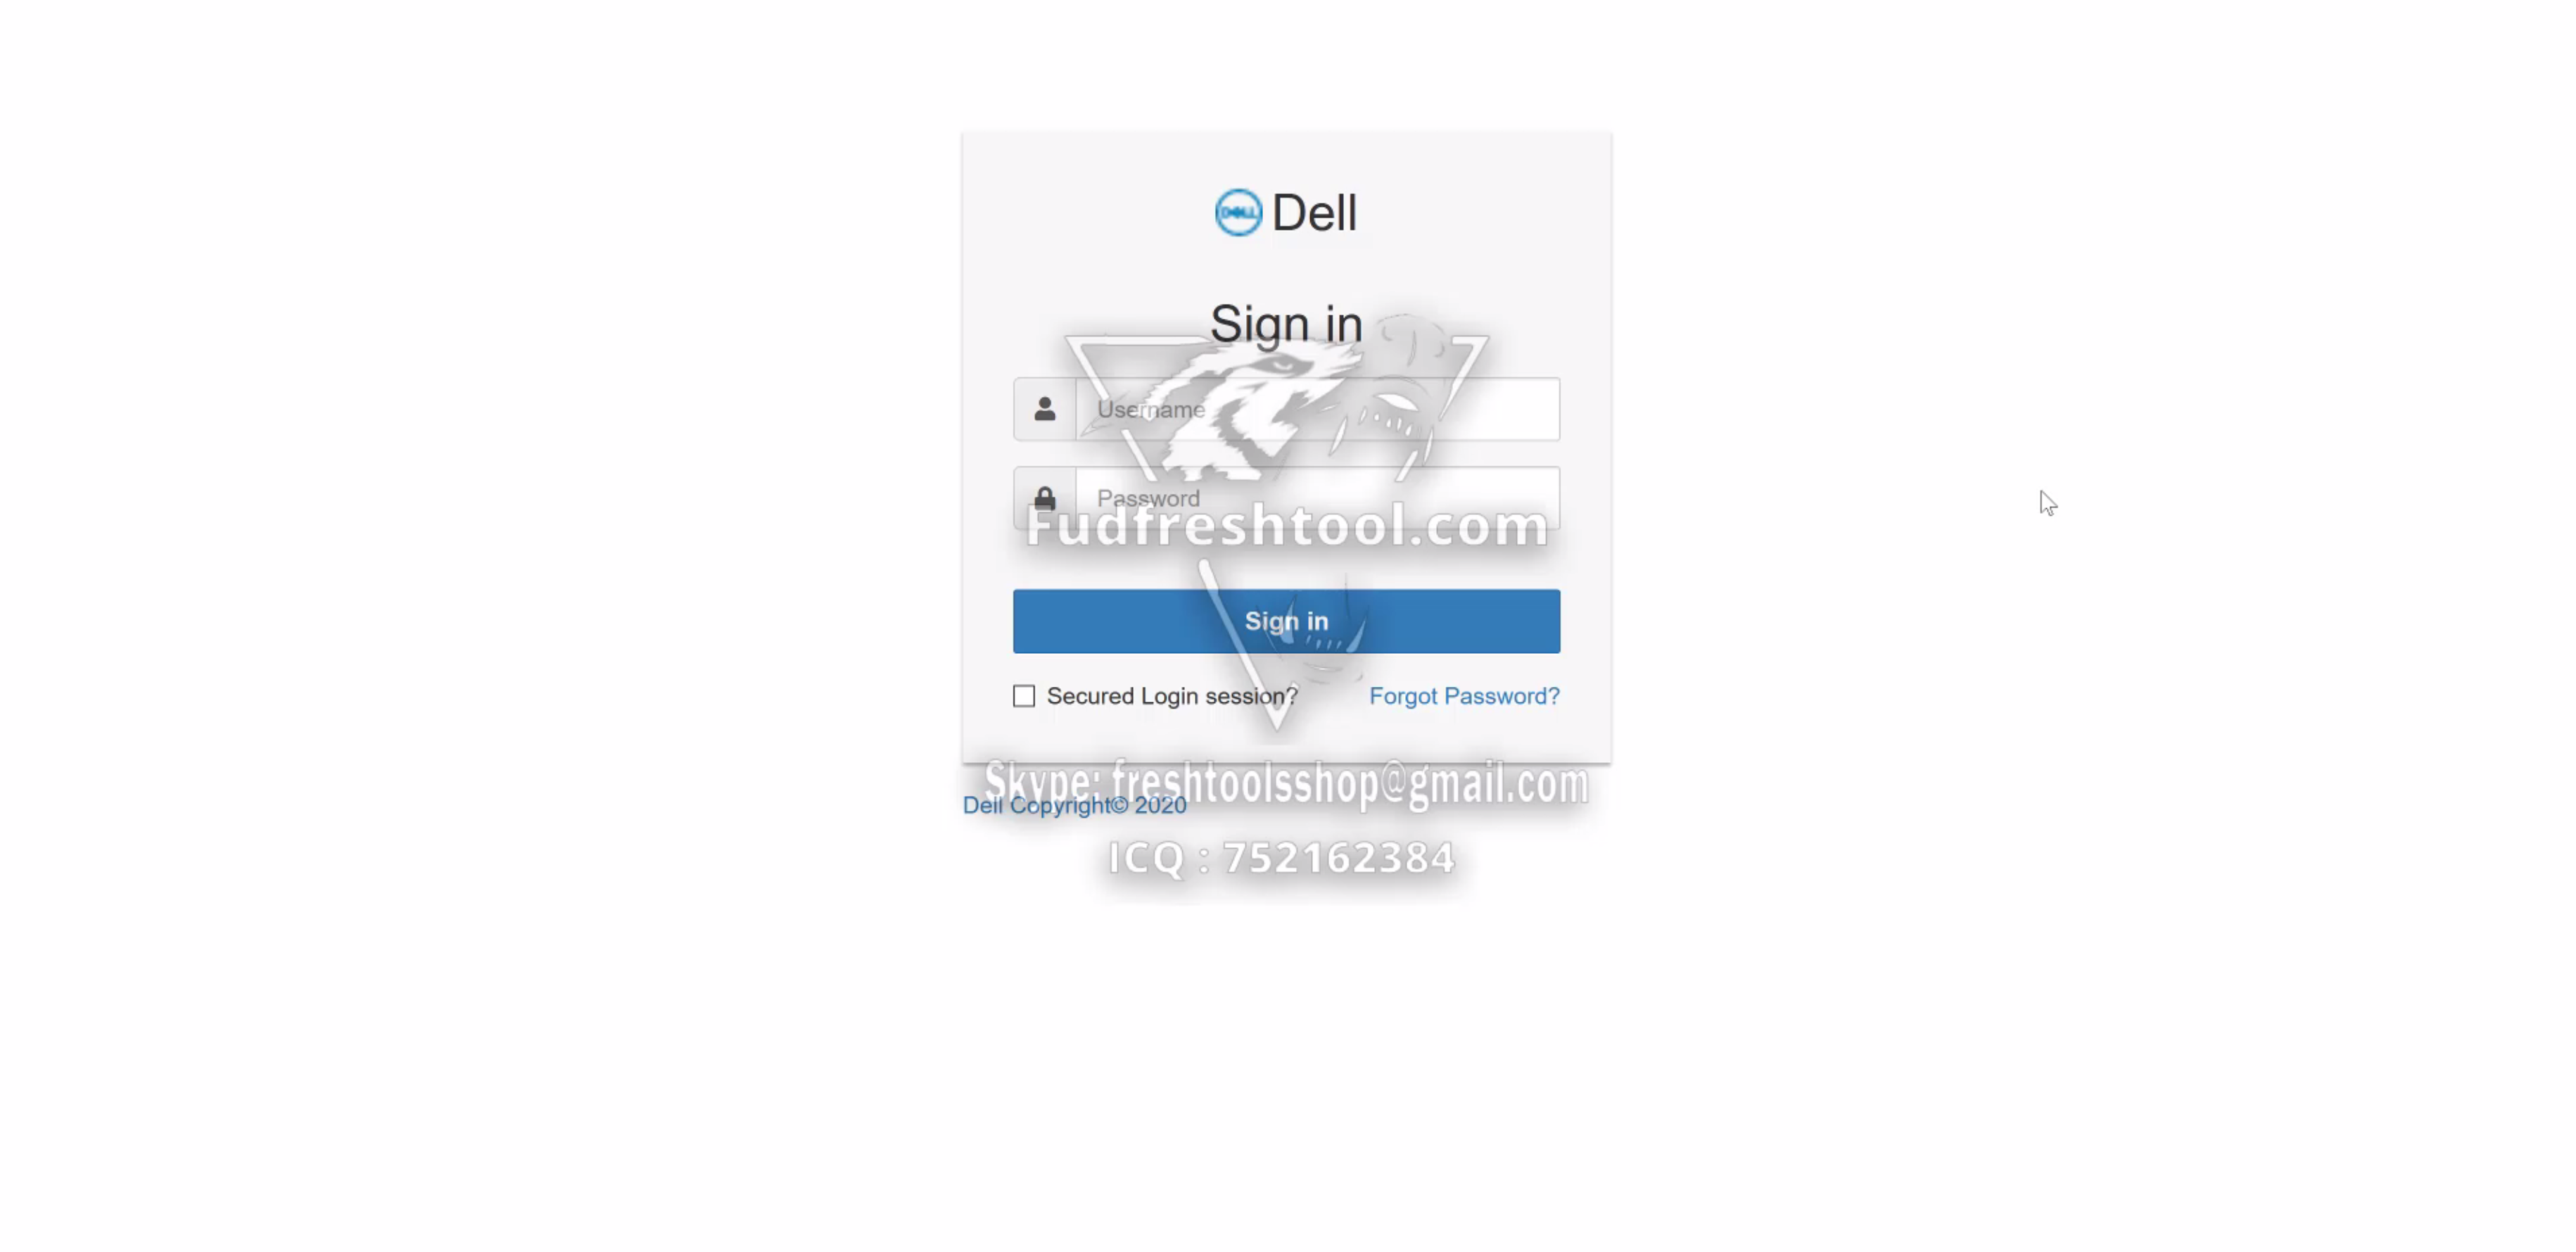 New Dell Scam Page